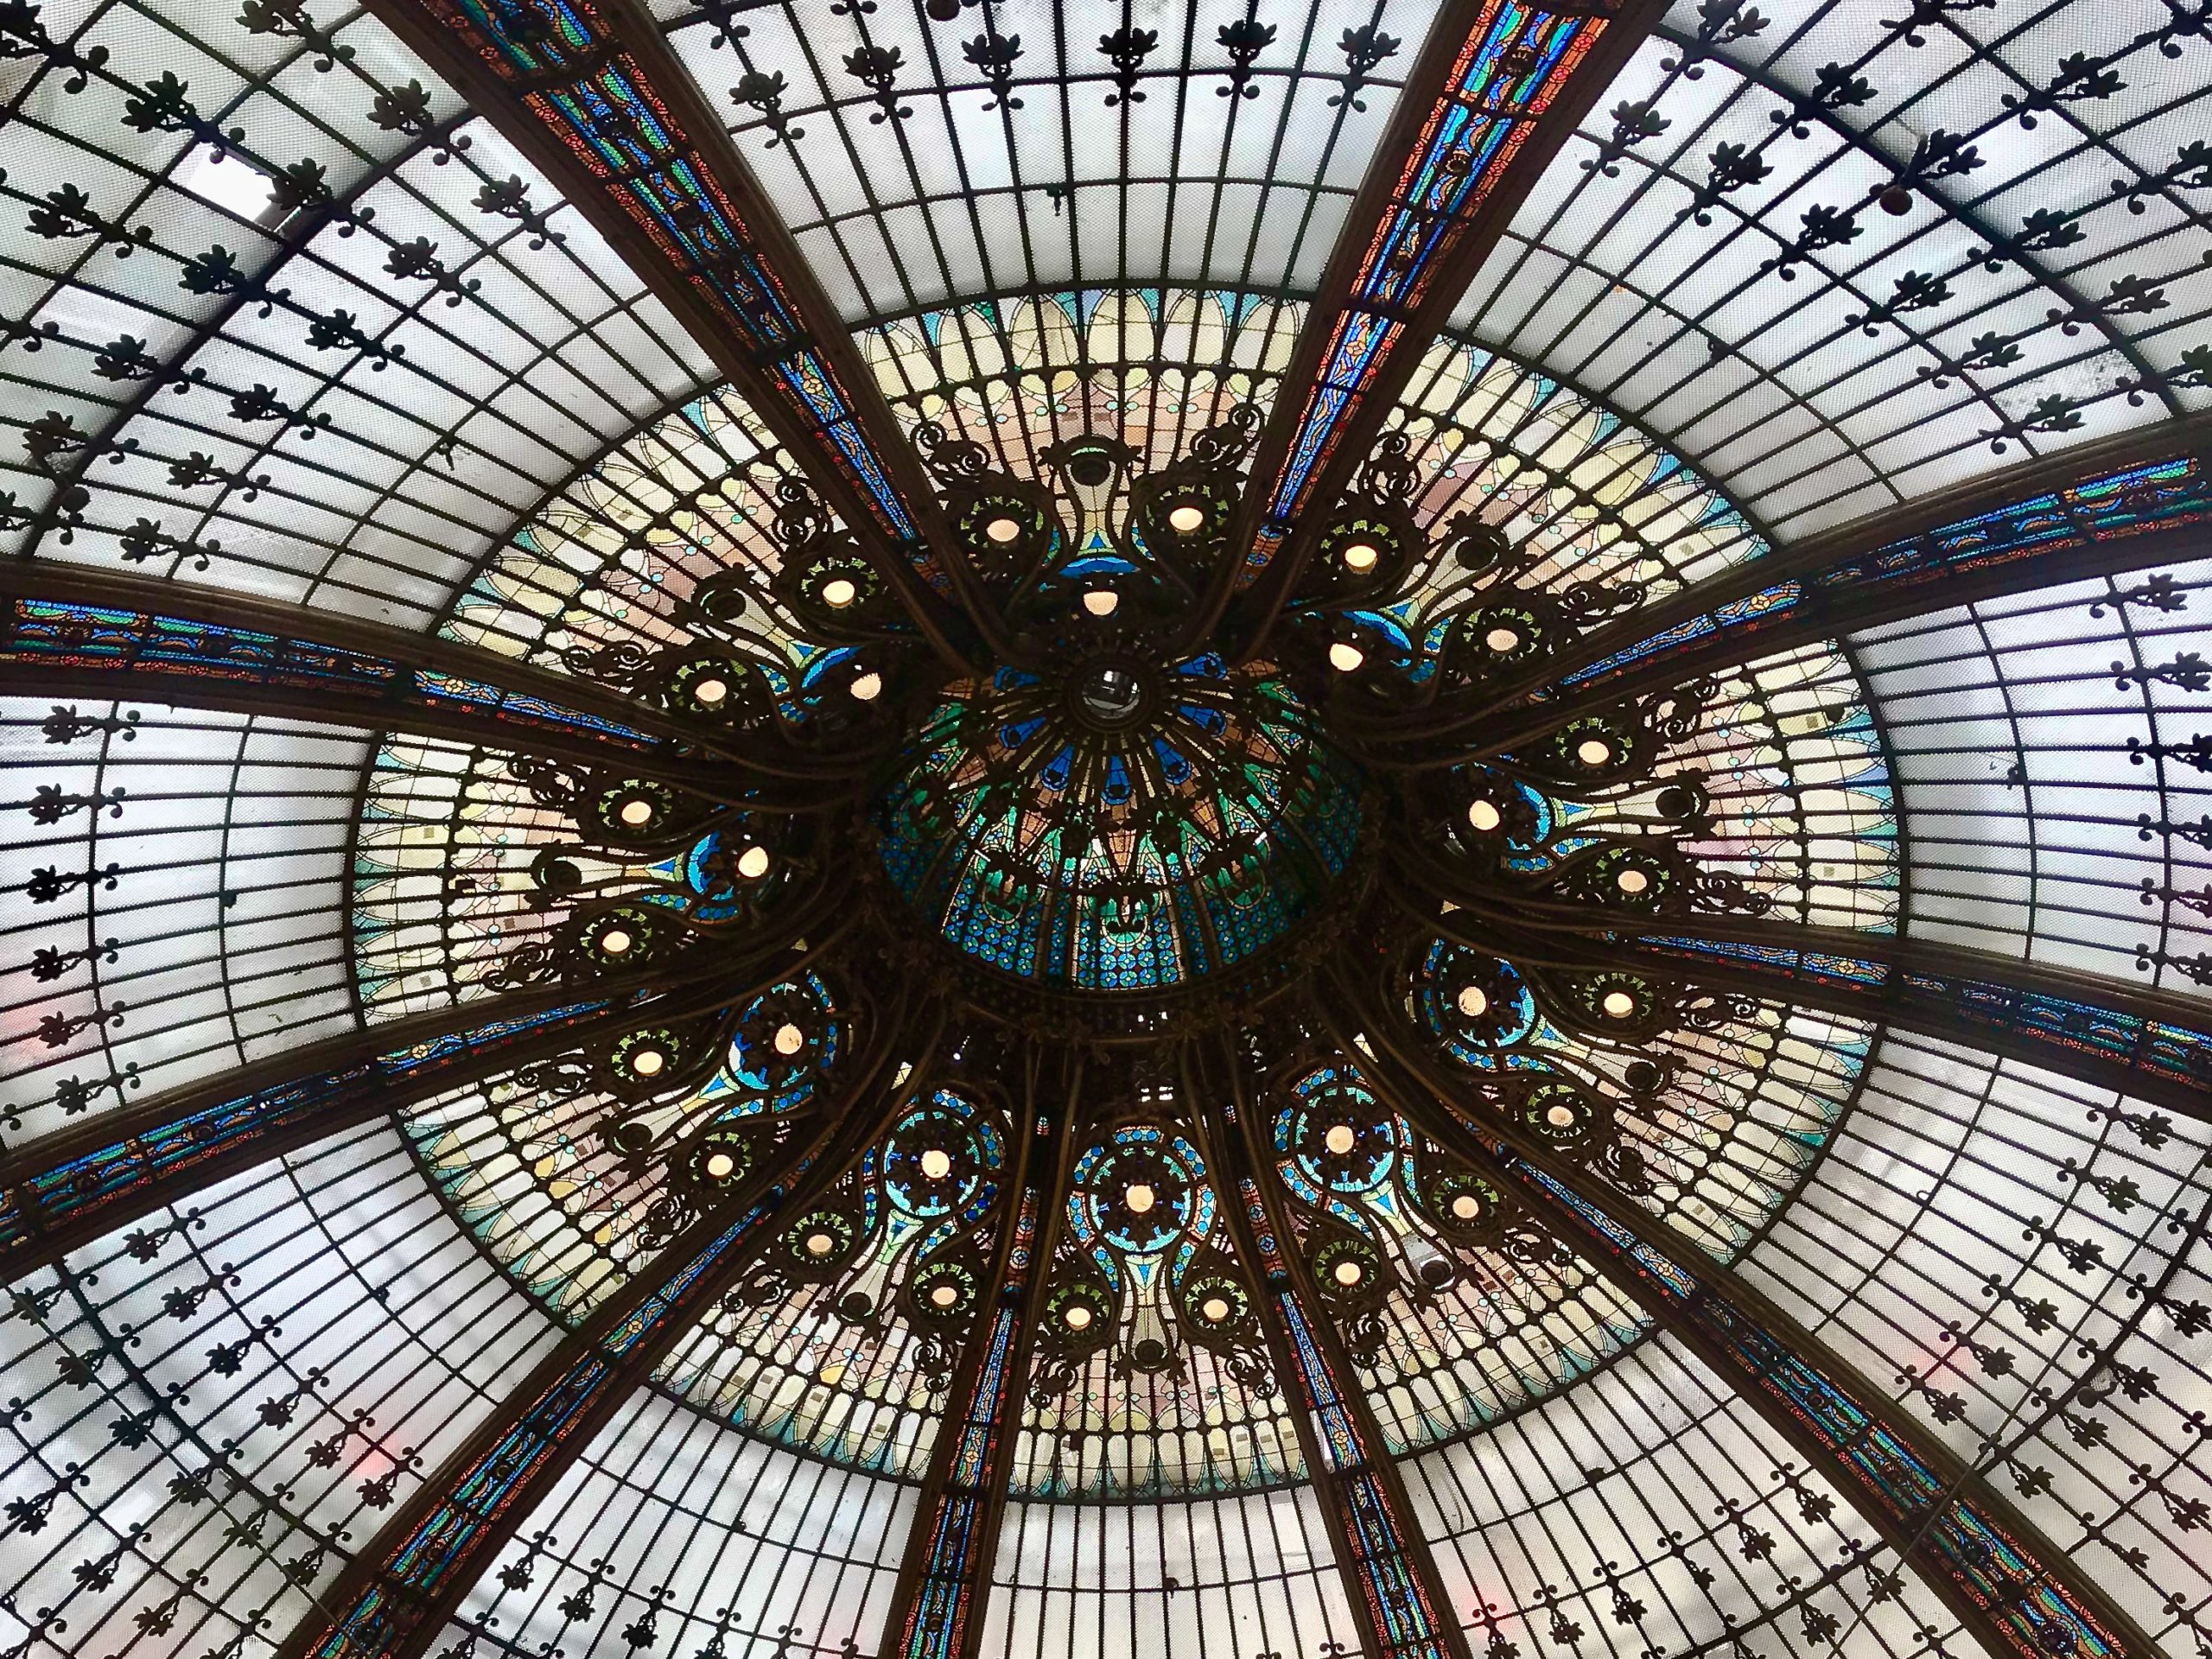 A close-up of the Galeries Lafayette's stained glass ceiling.